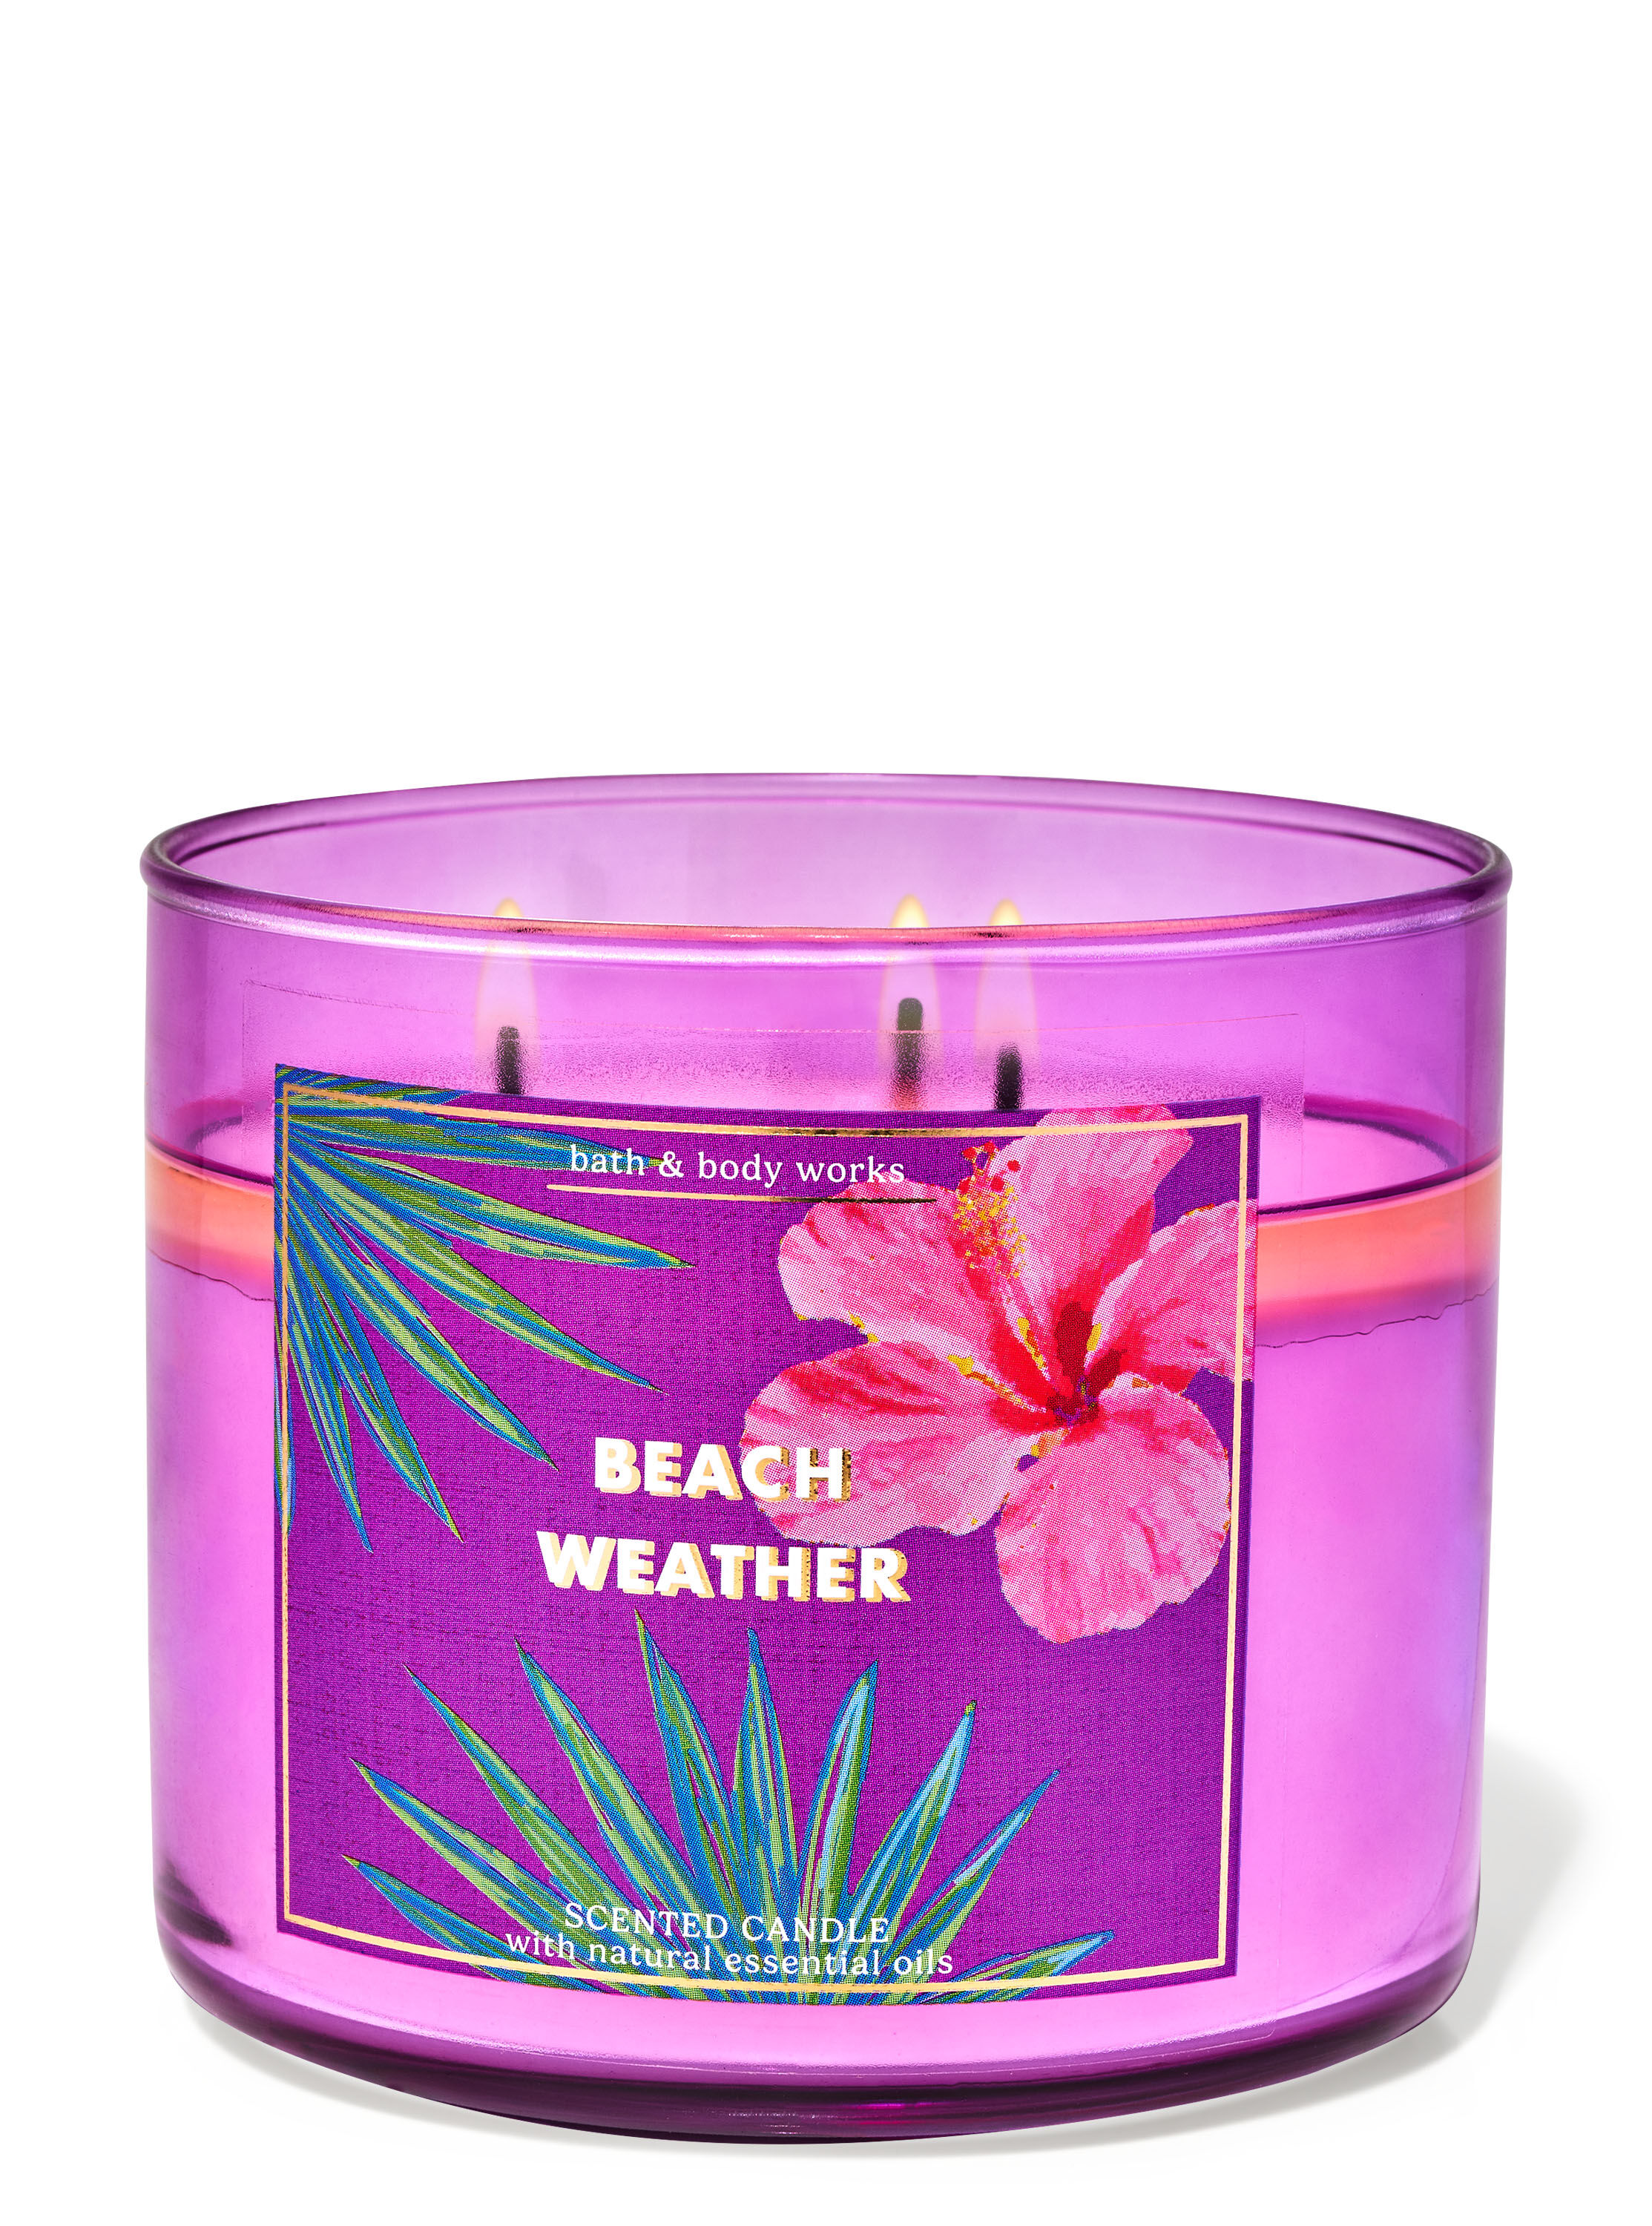 Beach Weather 3-Wick Candle